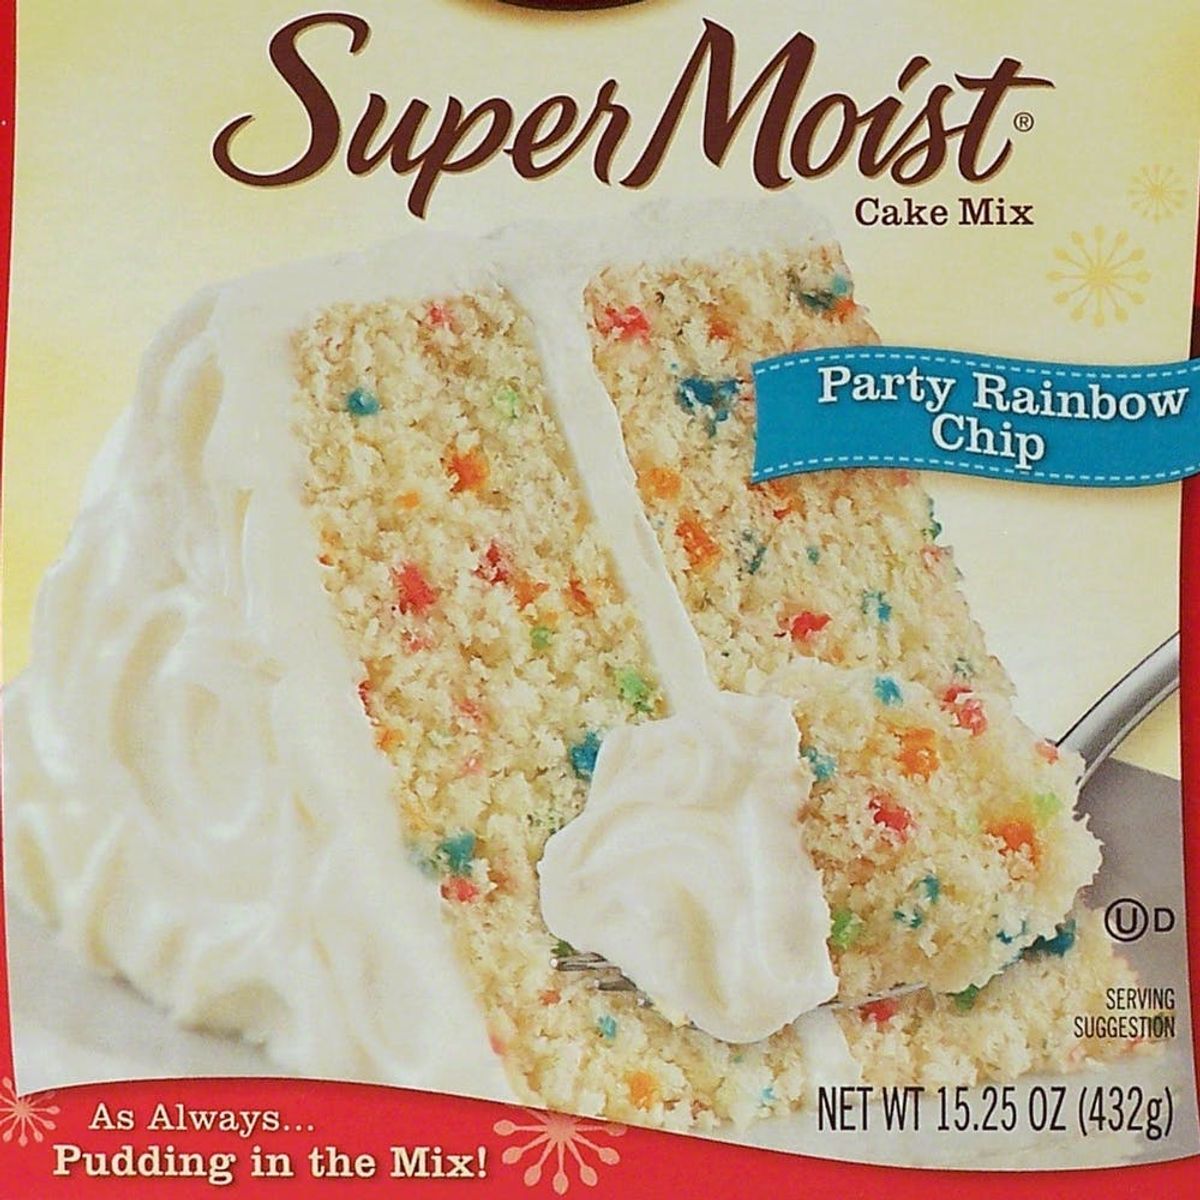 Why You Might Want to Think Twice Before Making That Rainbow Cake Mix